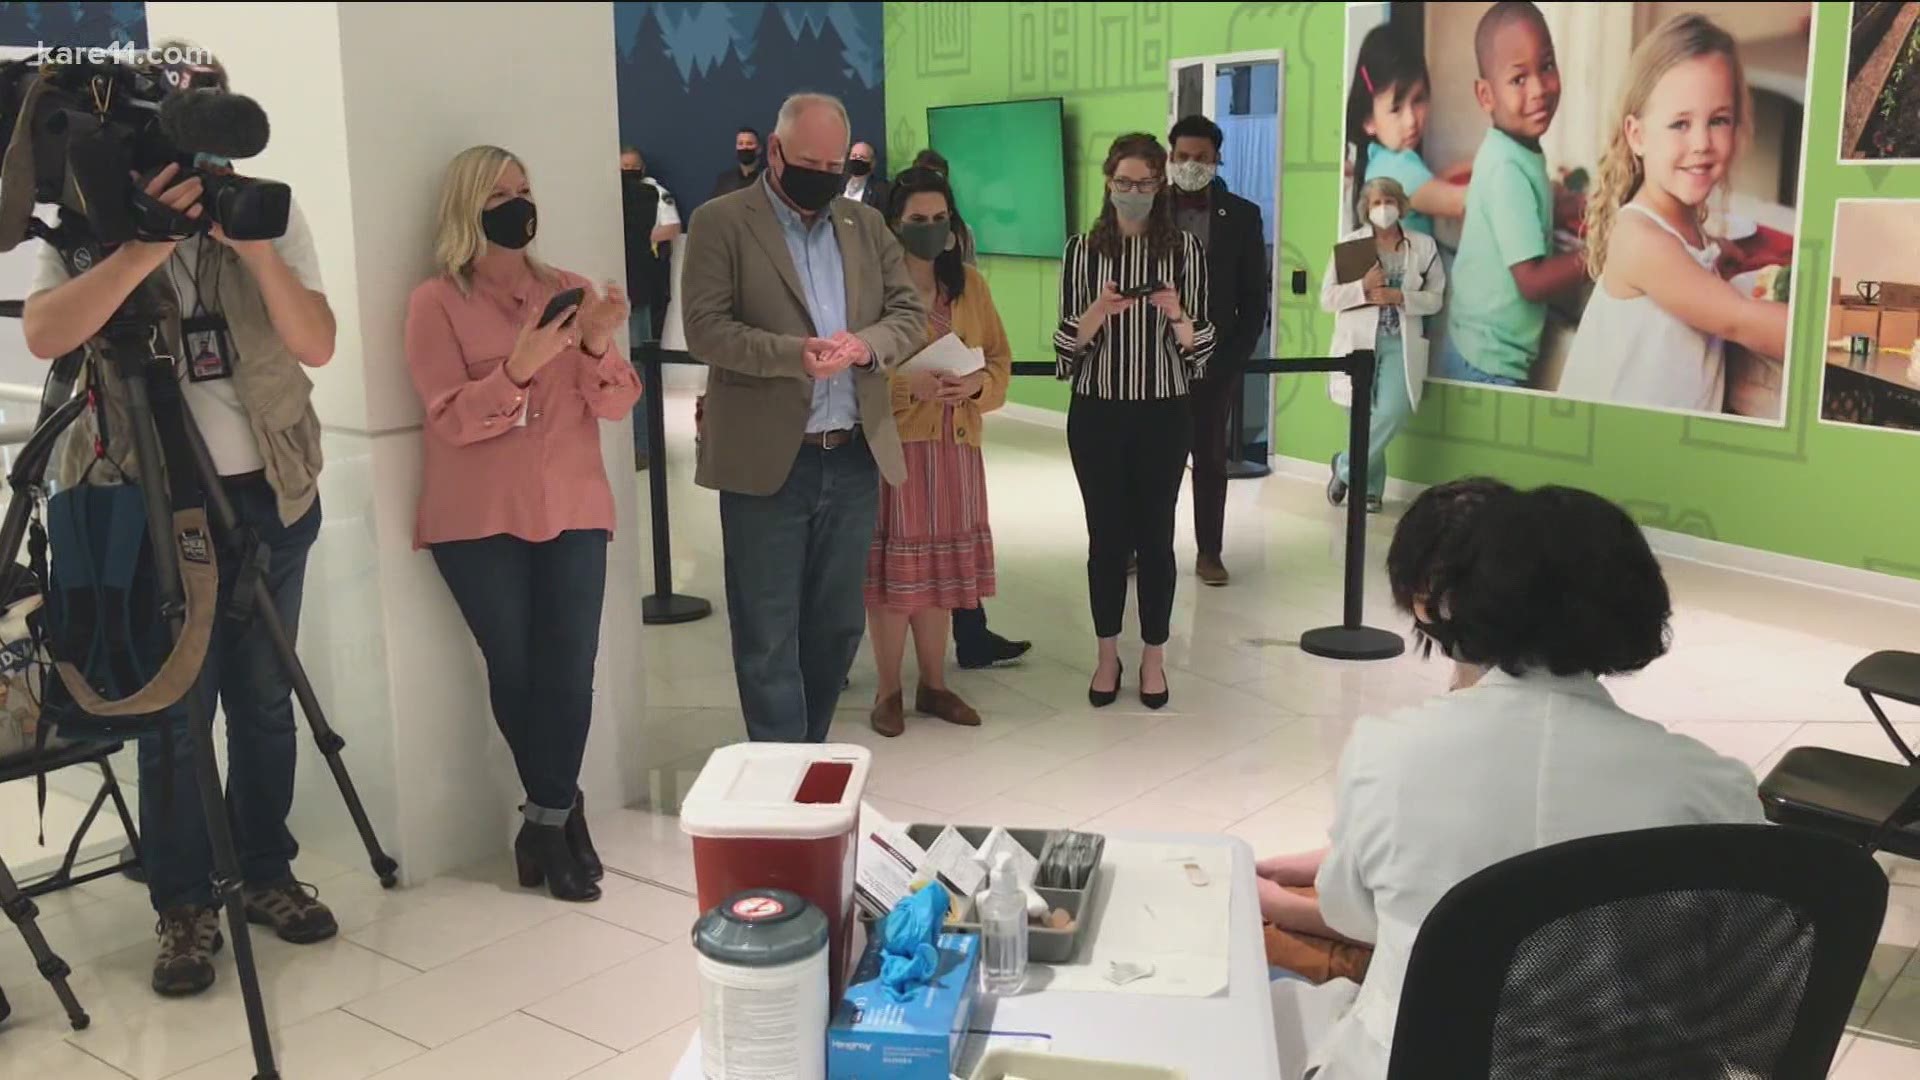 Gov. Tim Walz invited a handful of his commissioners and their 12 to 15-year-old children to Mall of America to talk about the importance of vaccinating young people